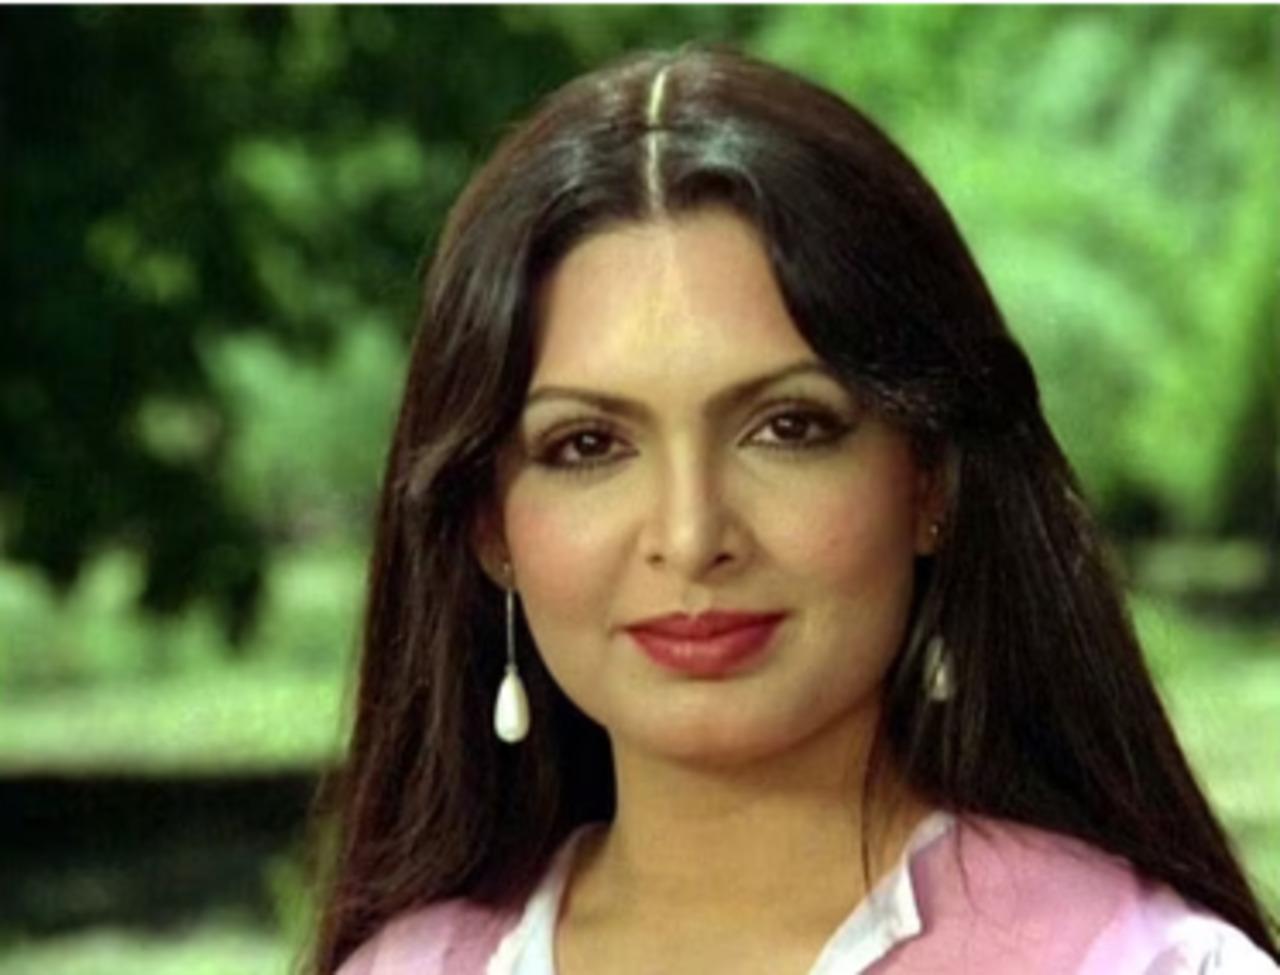 Parveen Babi’s bangsIn the '70s, who didn't covet Parveen Babi's iconic bangs? Her free-flowing locks with those standout bangs showcased her as the epitome of a diva. It's no surprise that her hairstyle remains one of Bollywood's most memorable looks.